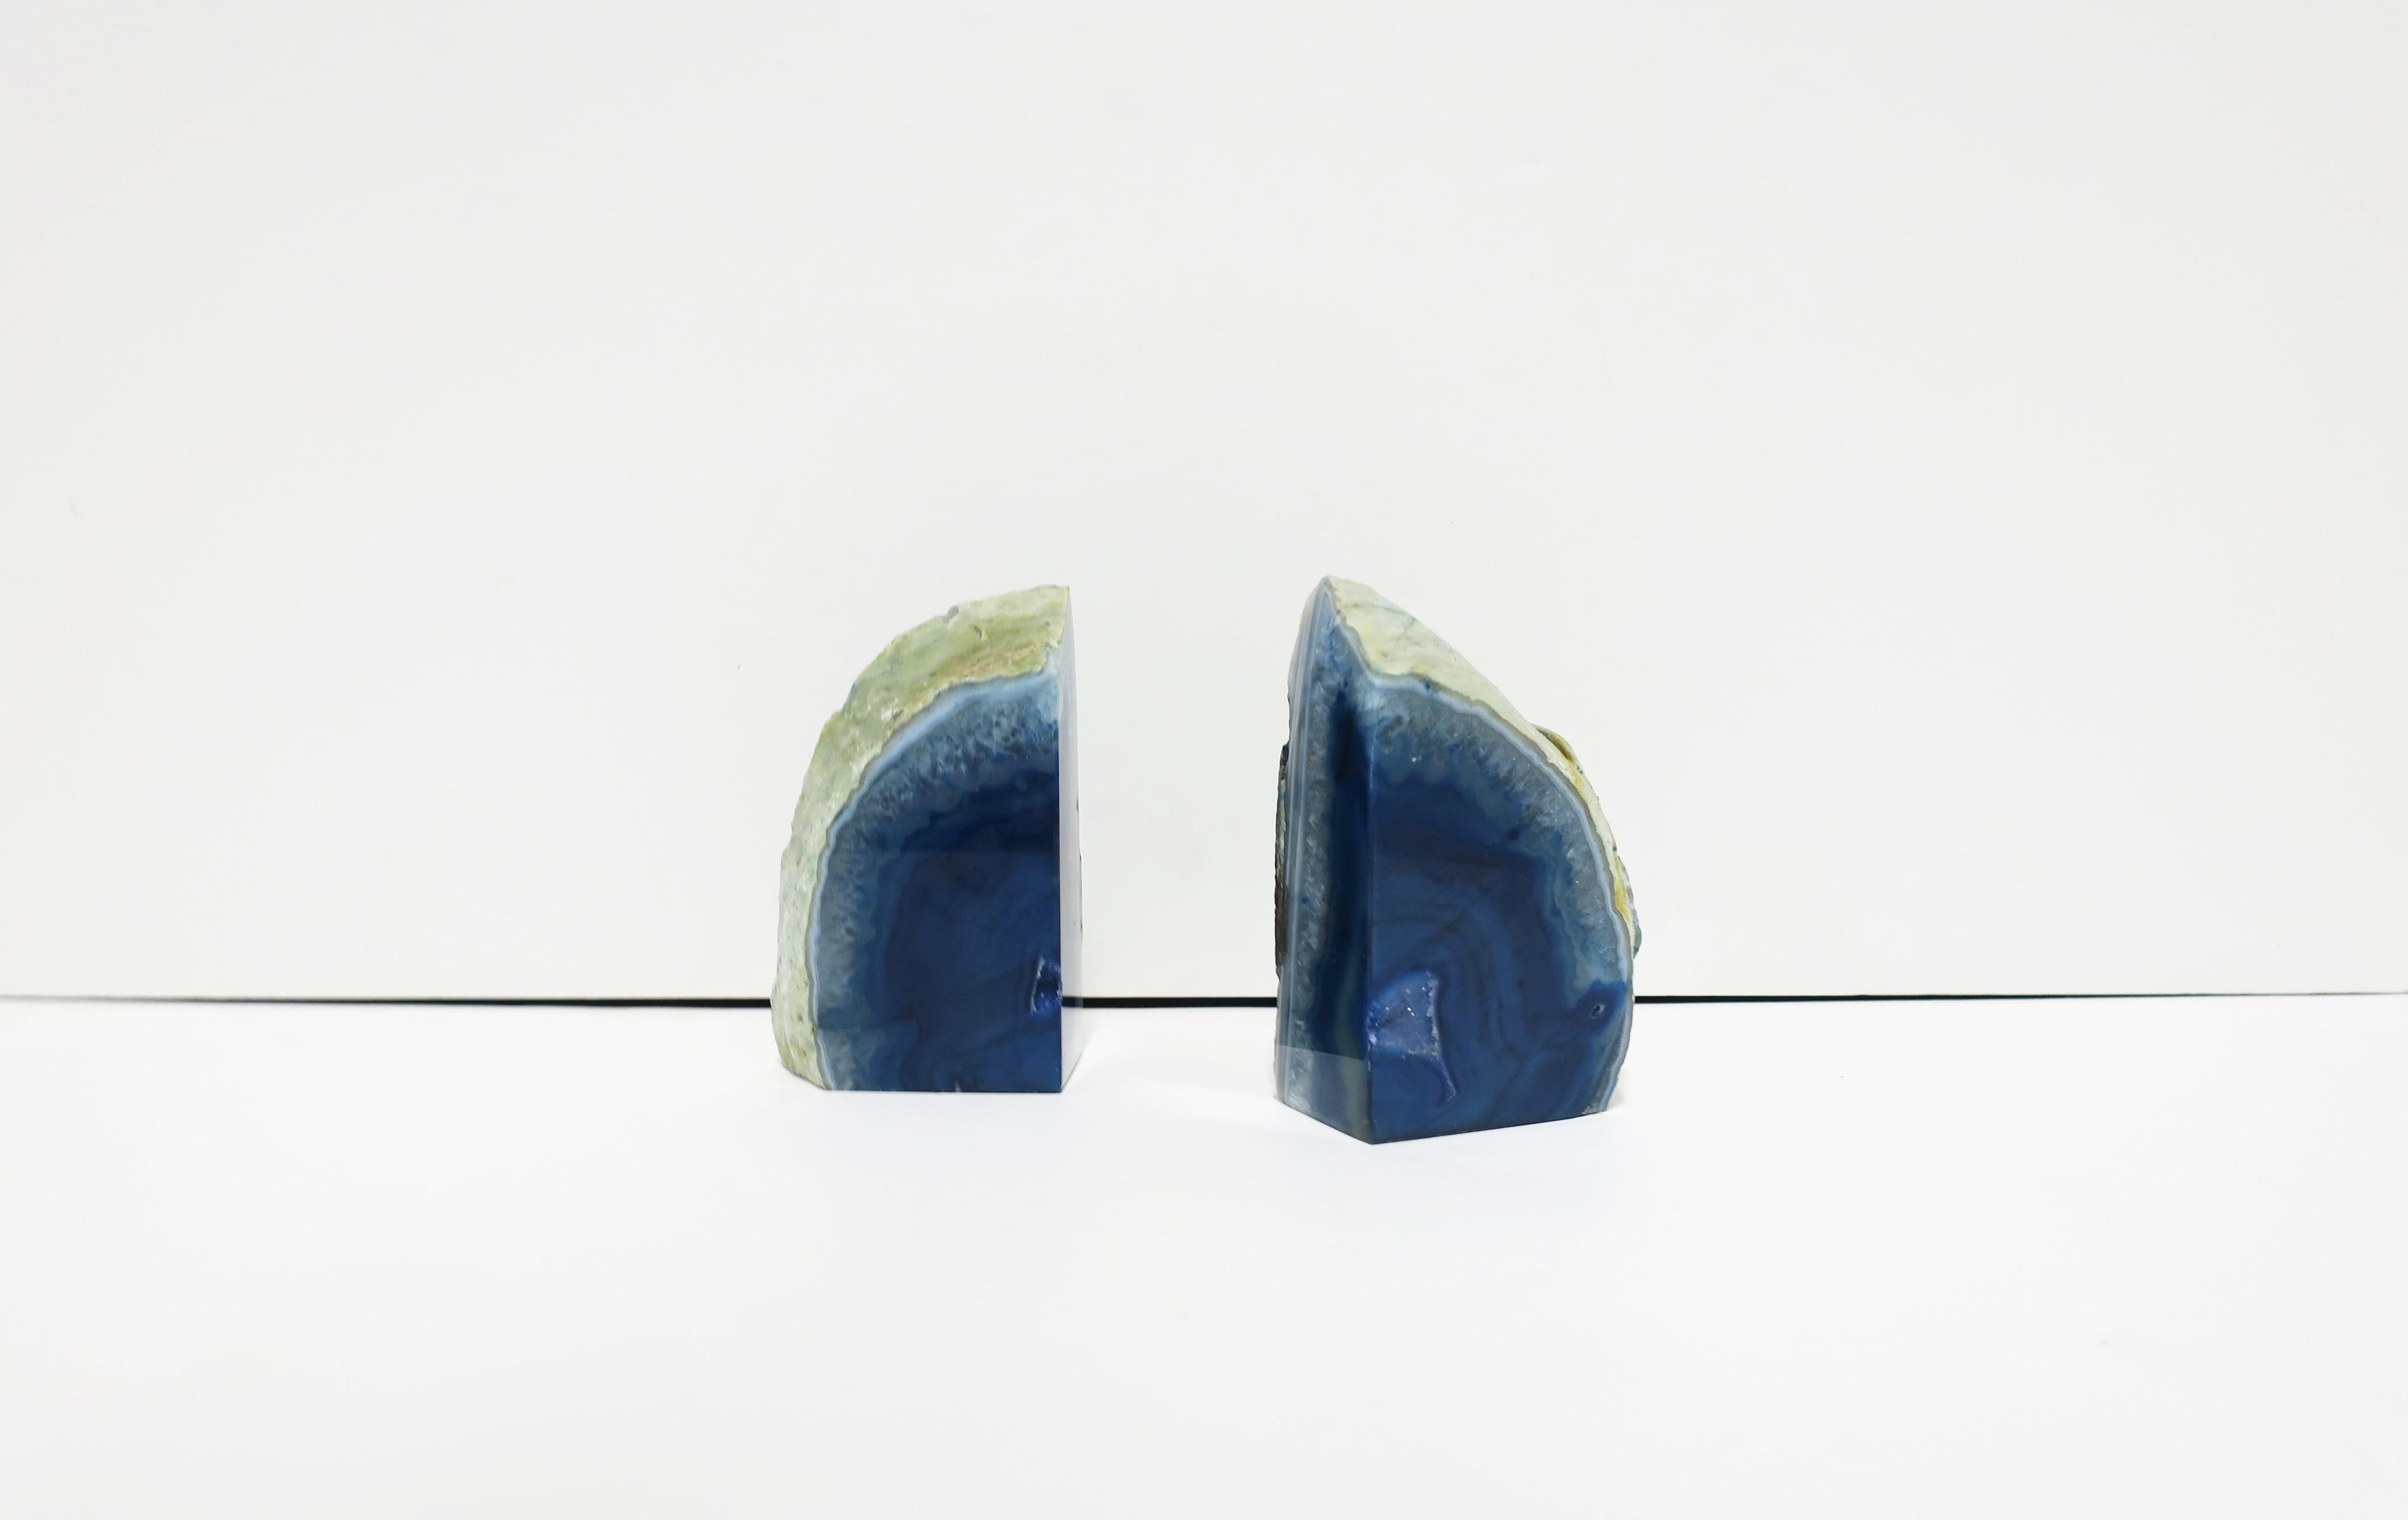 20th Century Blue Agate Onyx Bookends or Decorative Objects, Pair